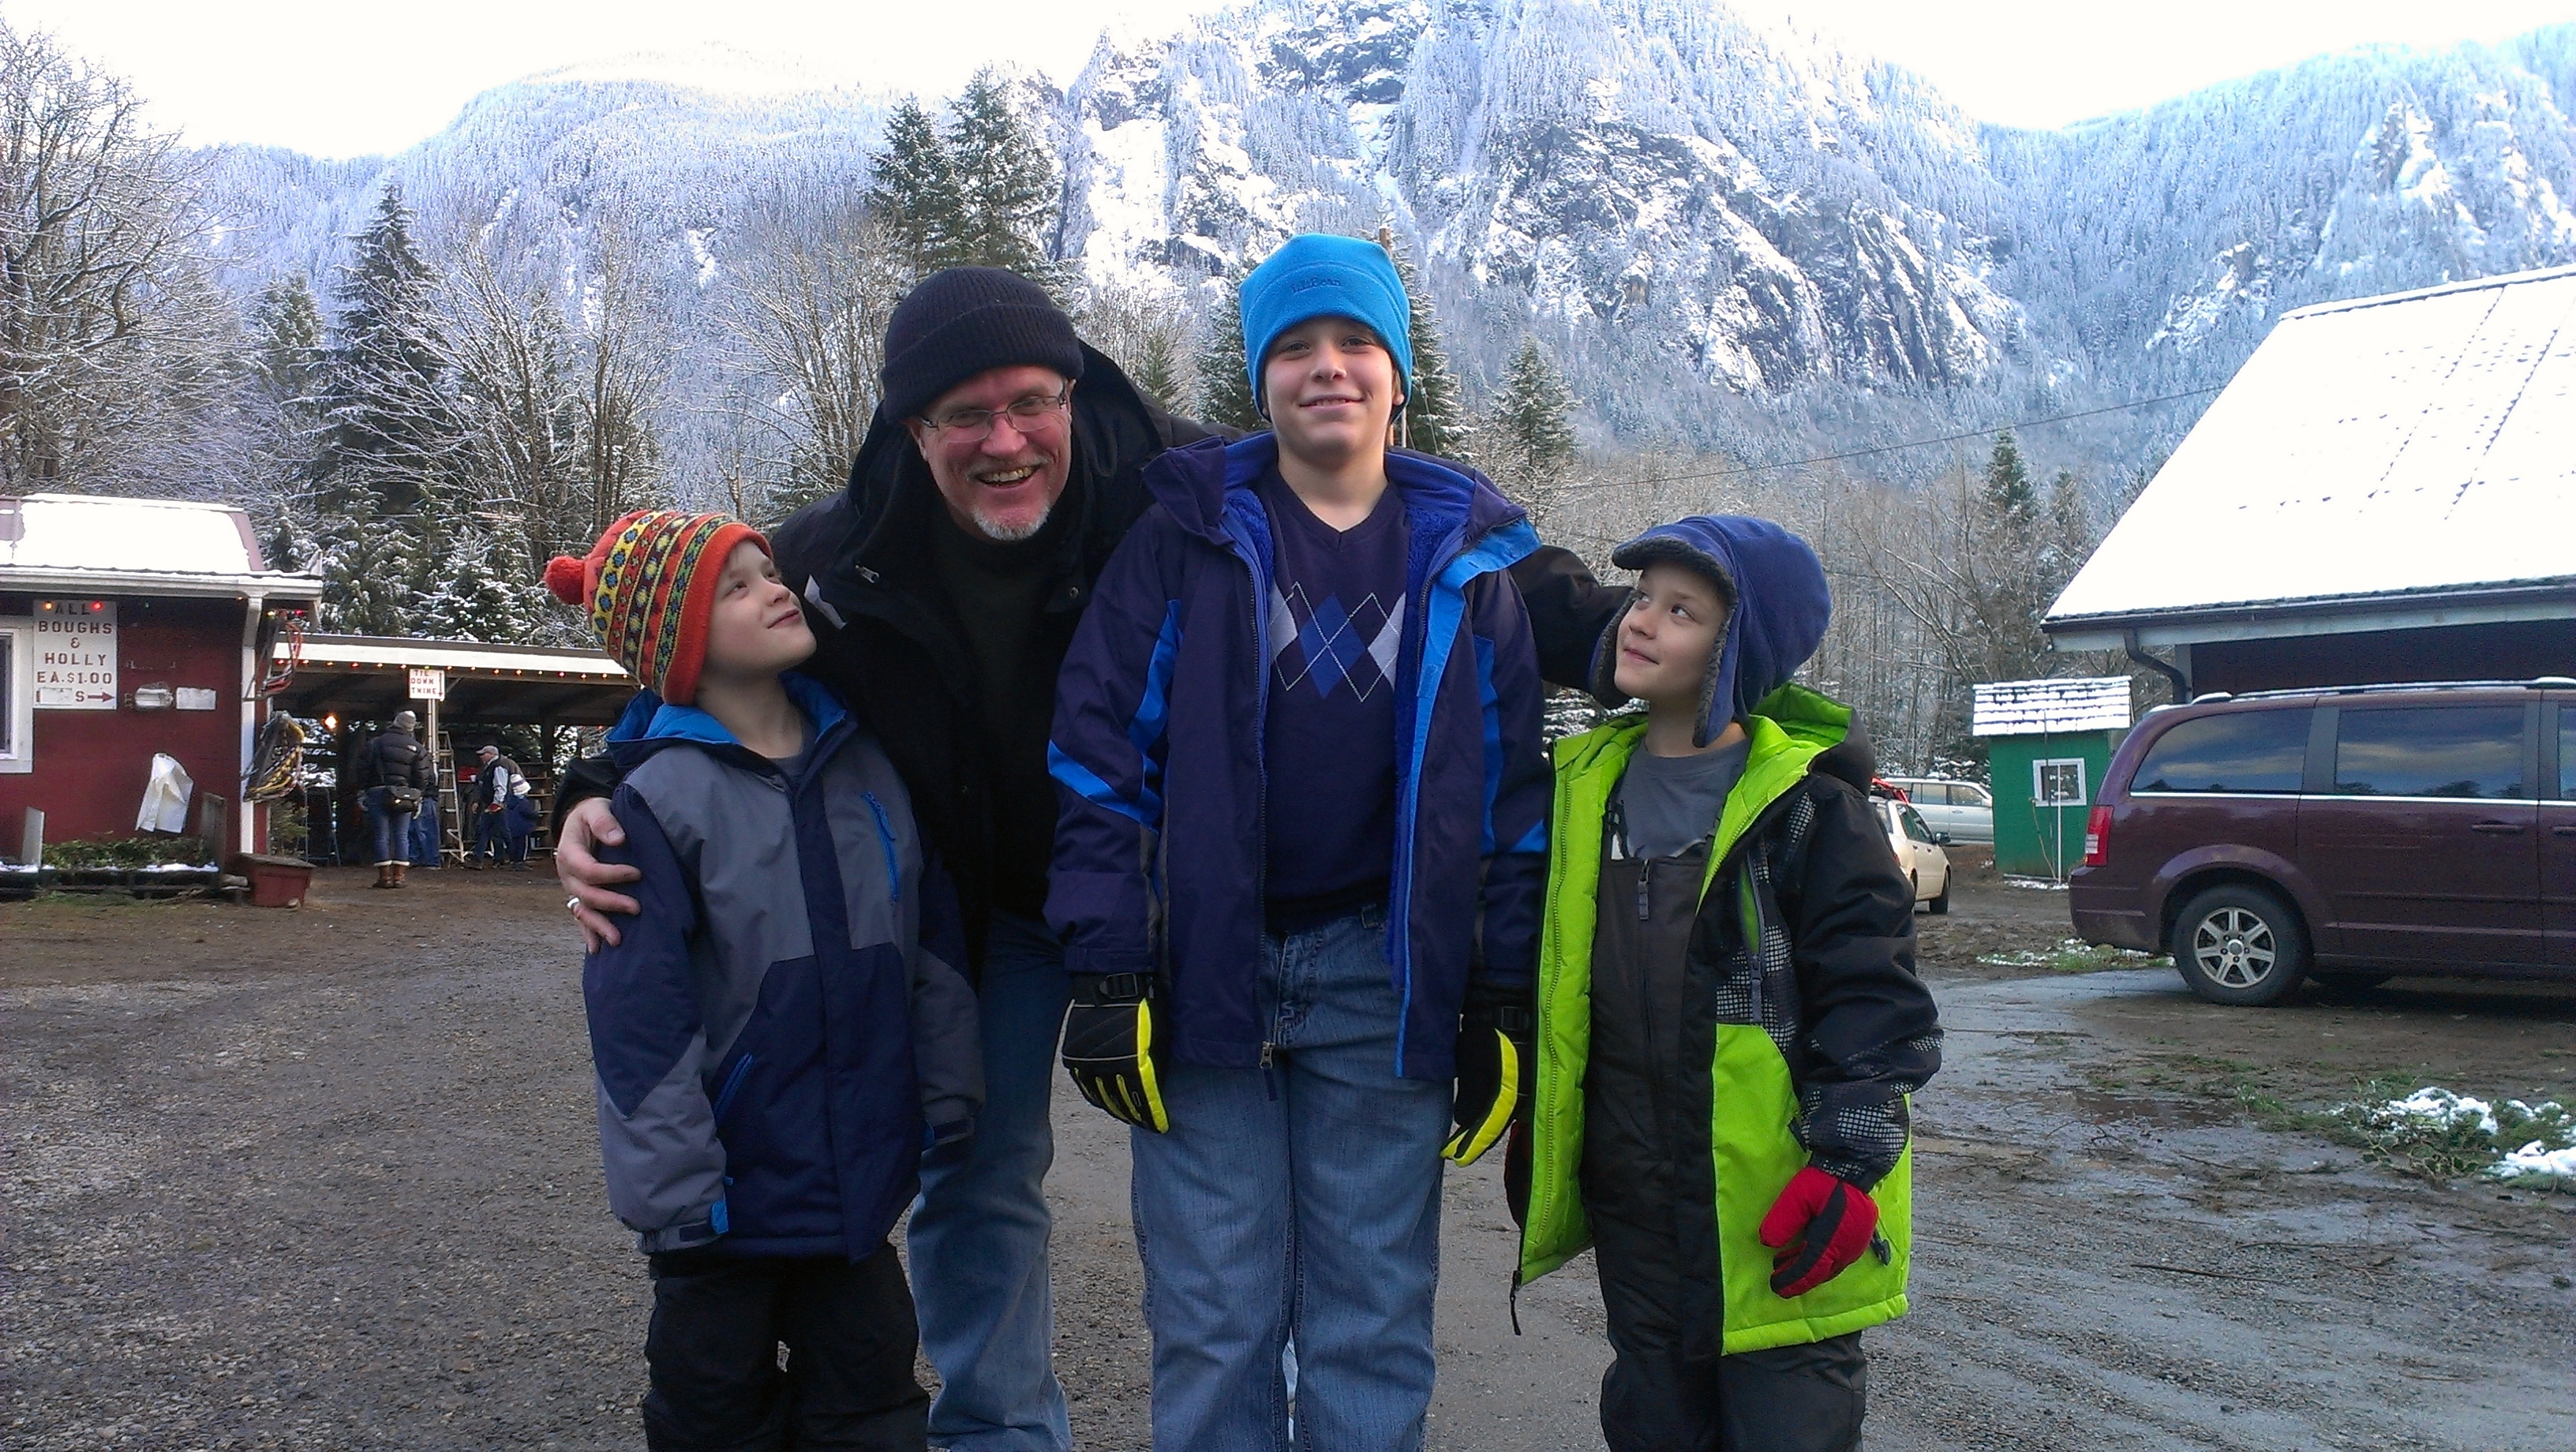 Rex with Ben, Ryan and Joe in North Bend WA